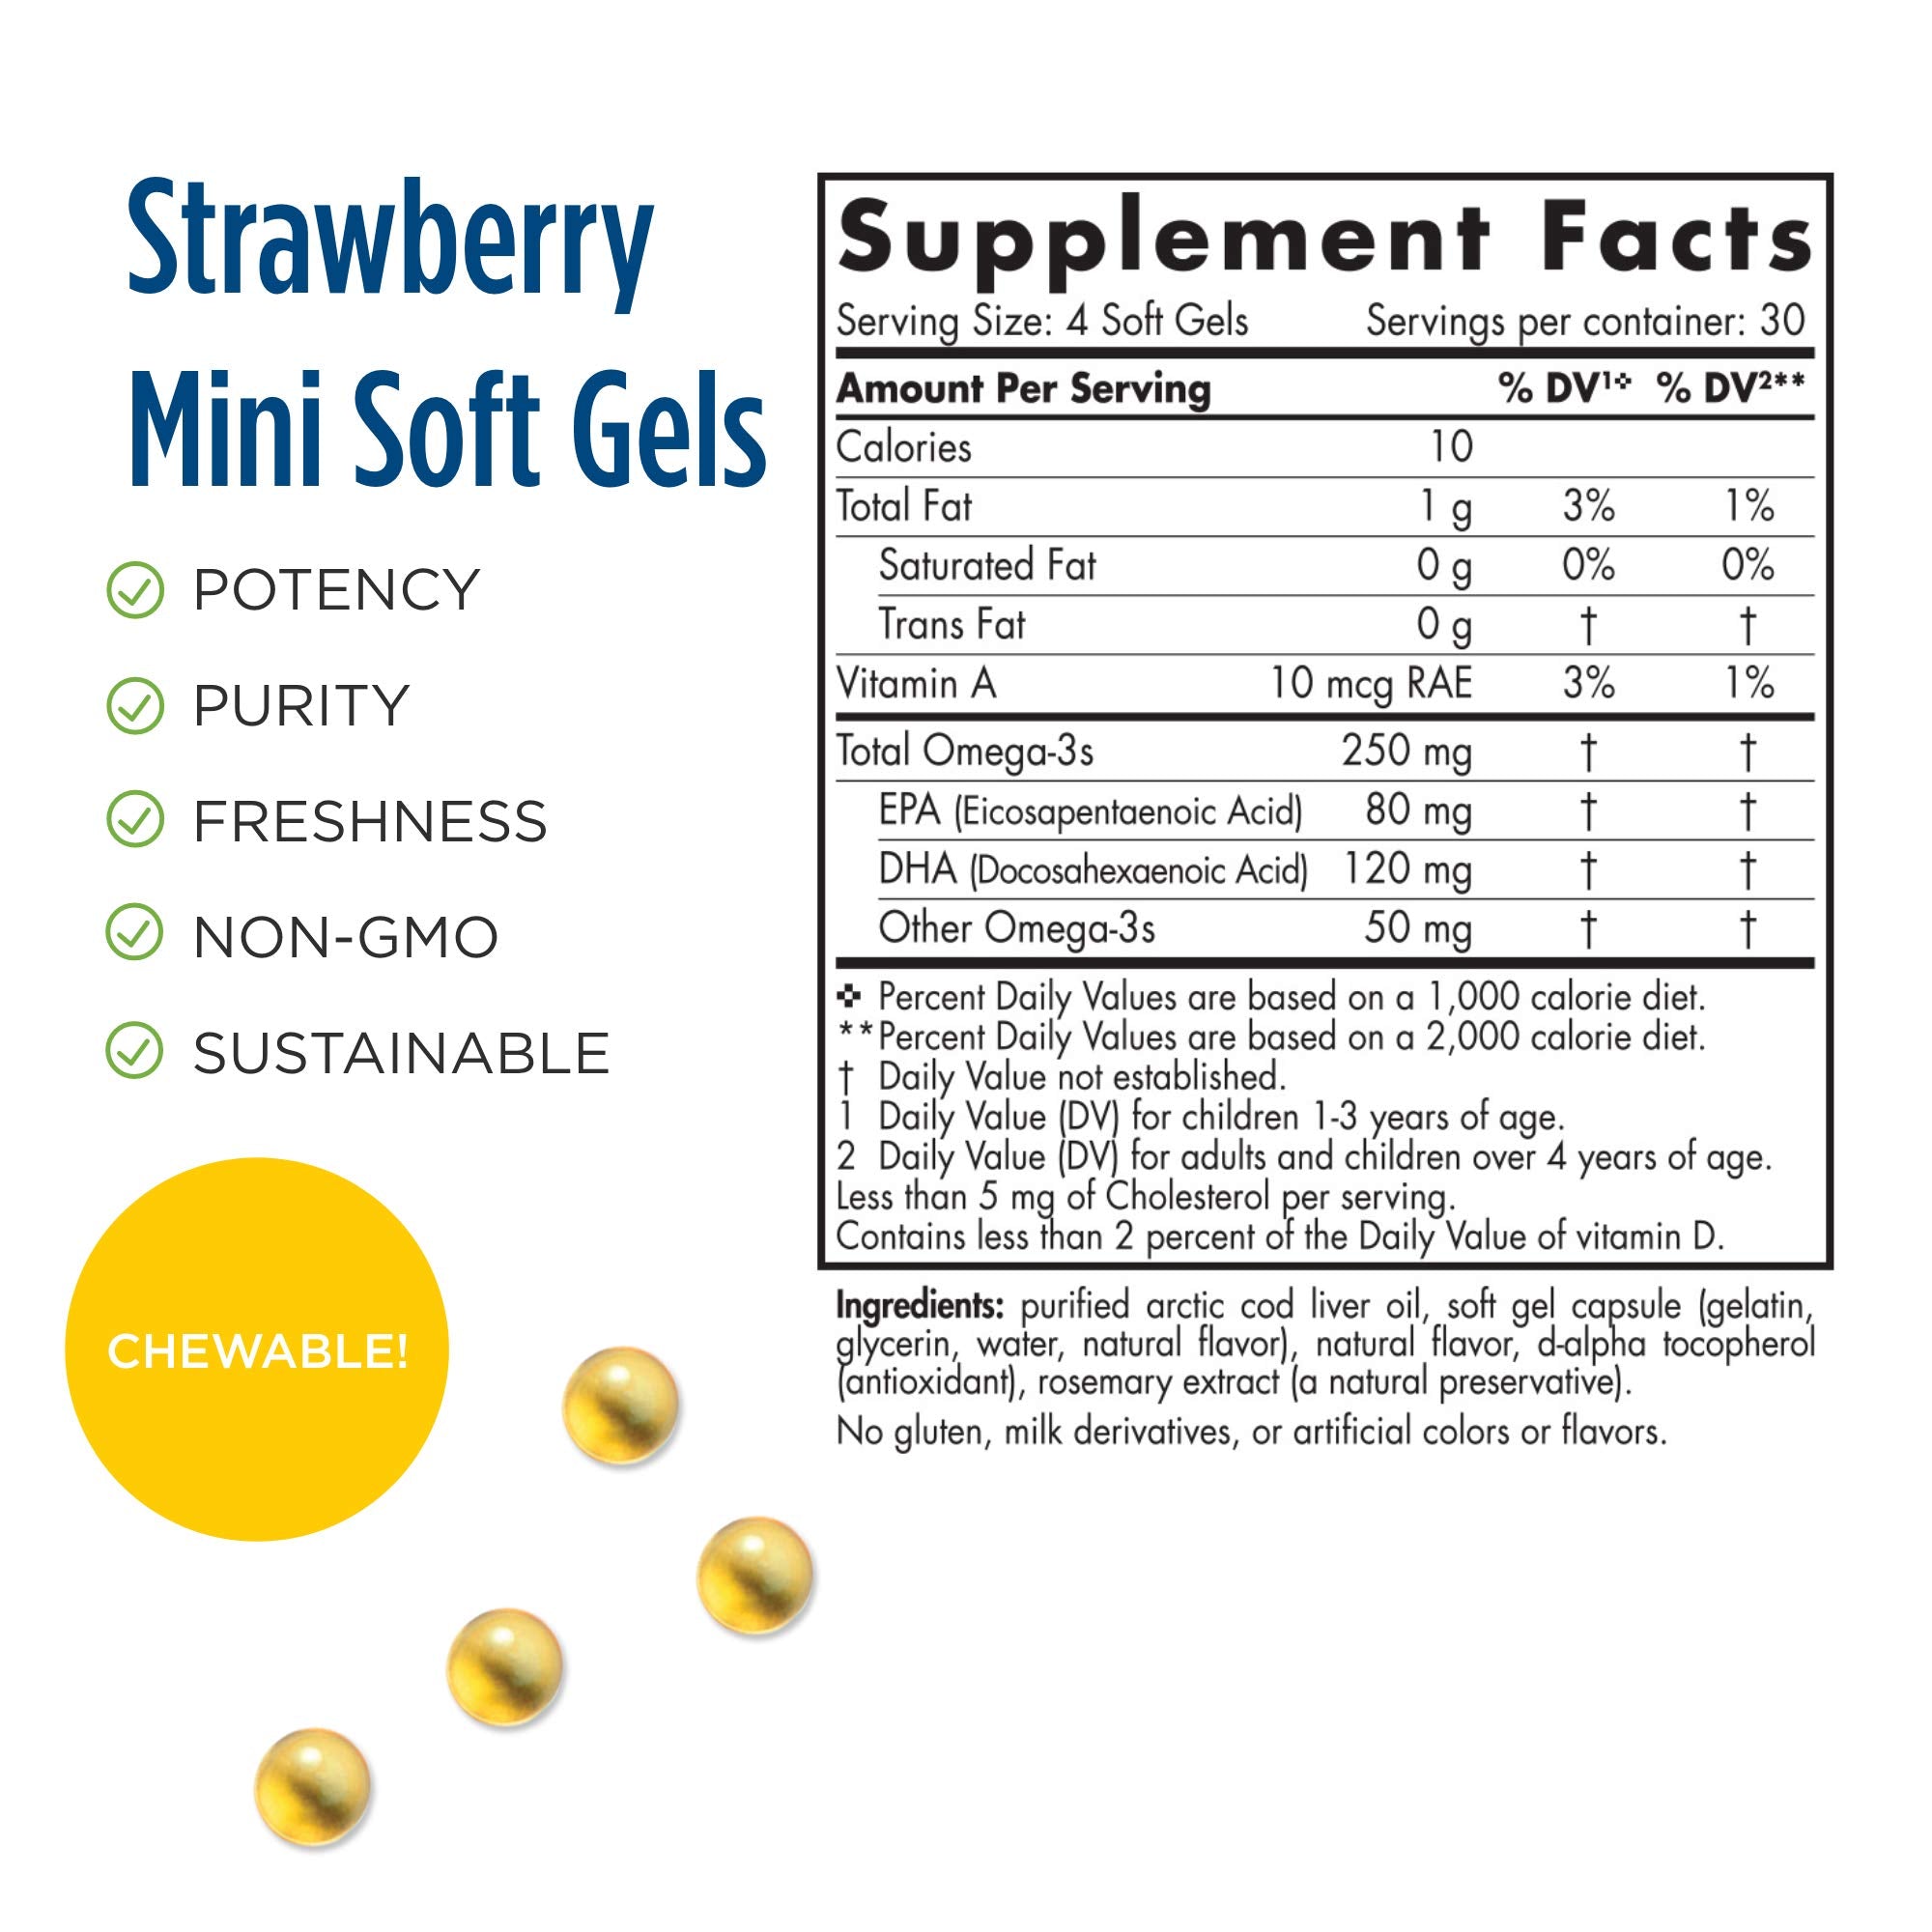 Nordic Naturals Children’s DHA, Strawberry - 120 Mini Chewable Soft Gels - 250 mg Omega-3 with EPA & DHA - Brain Development & Function - Non-GMO - 30 Servings